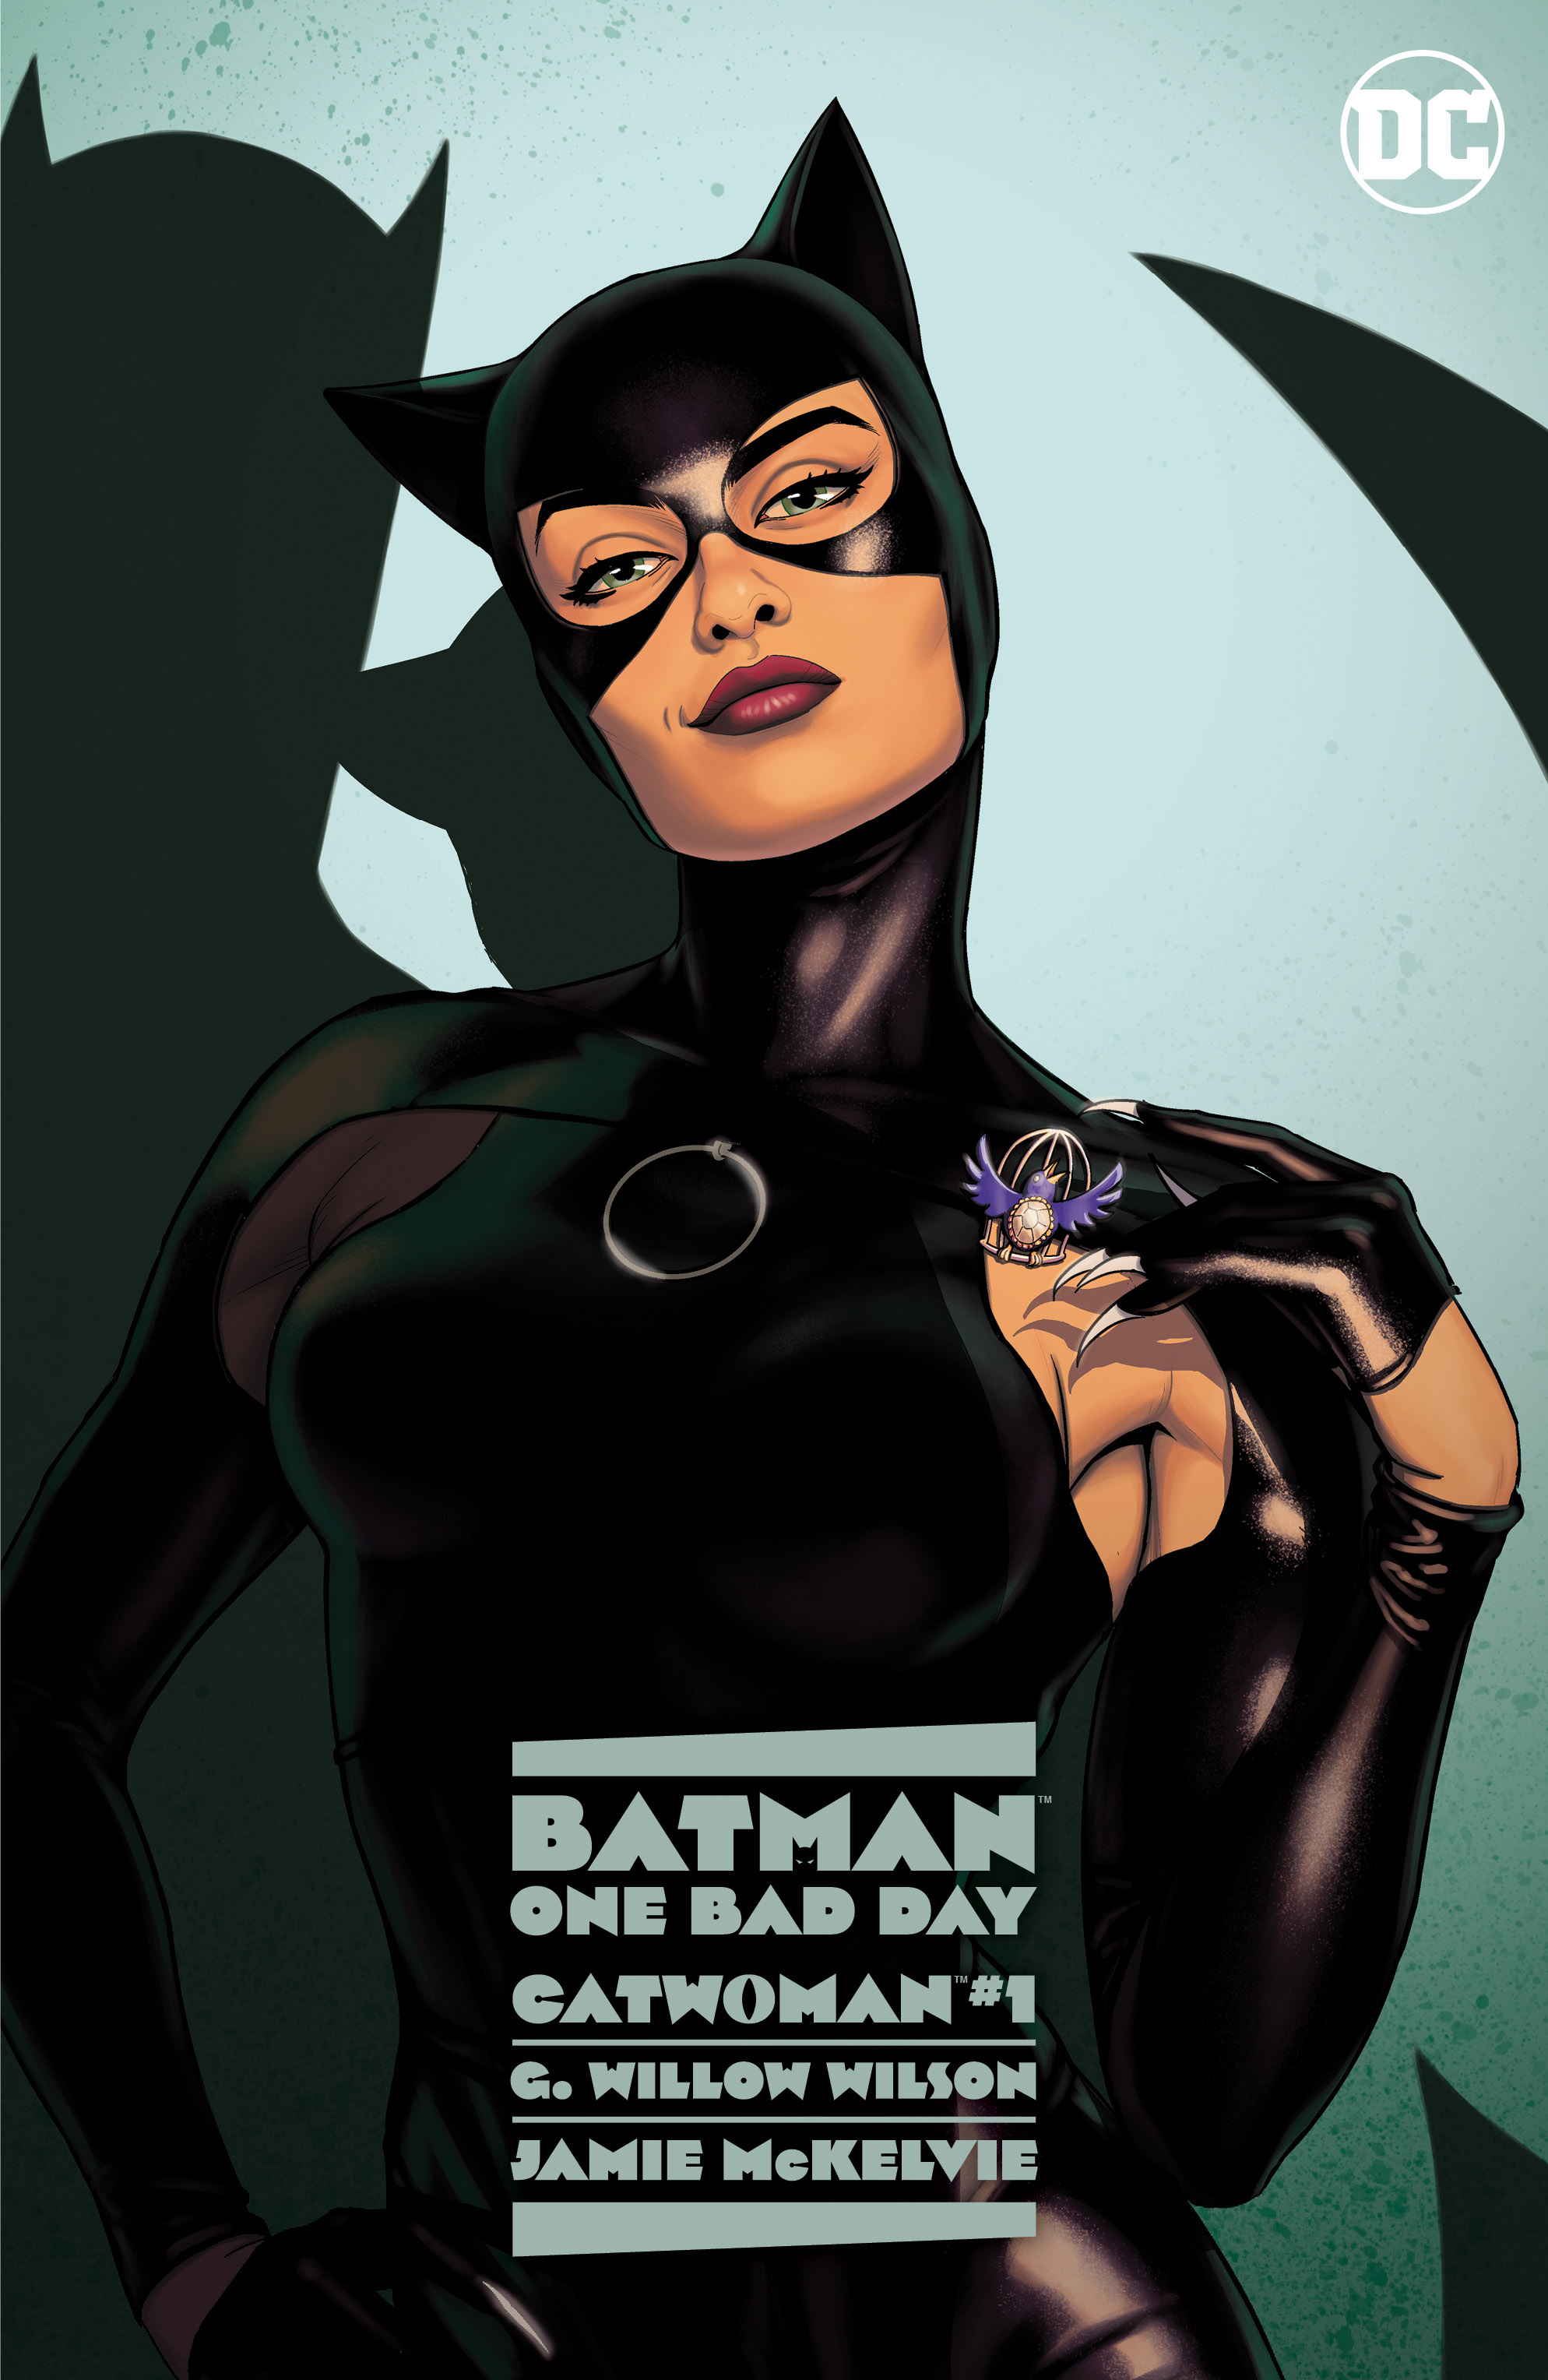 Batman One Bad Day Catwoman #1 (One Shot) Cover A Jamie Mckelvie